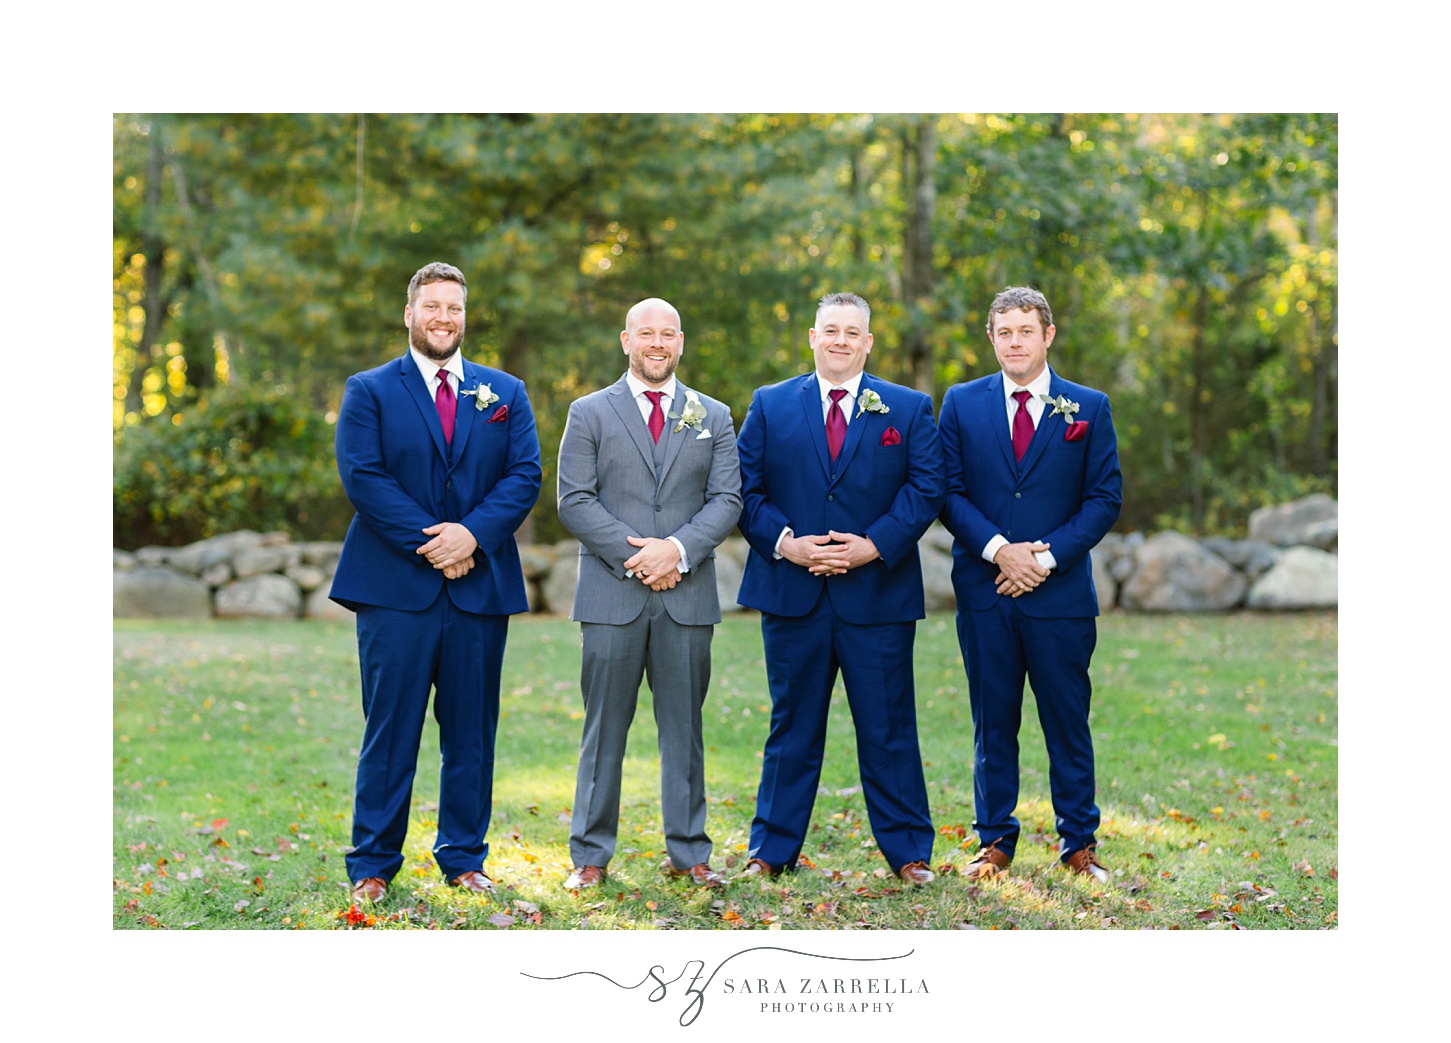 groomsmen in navy suits pose with groom in grey suit at Gerald's Farm